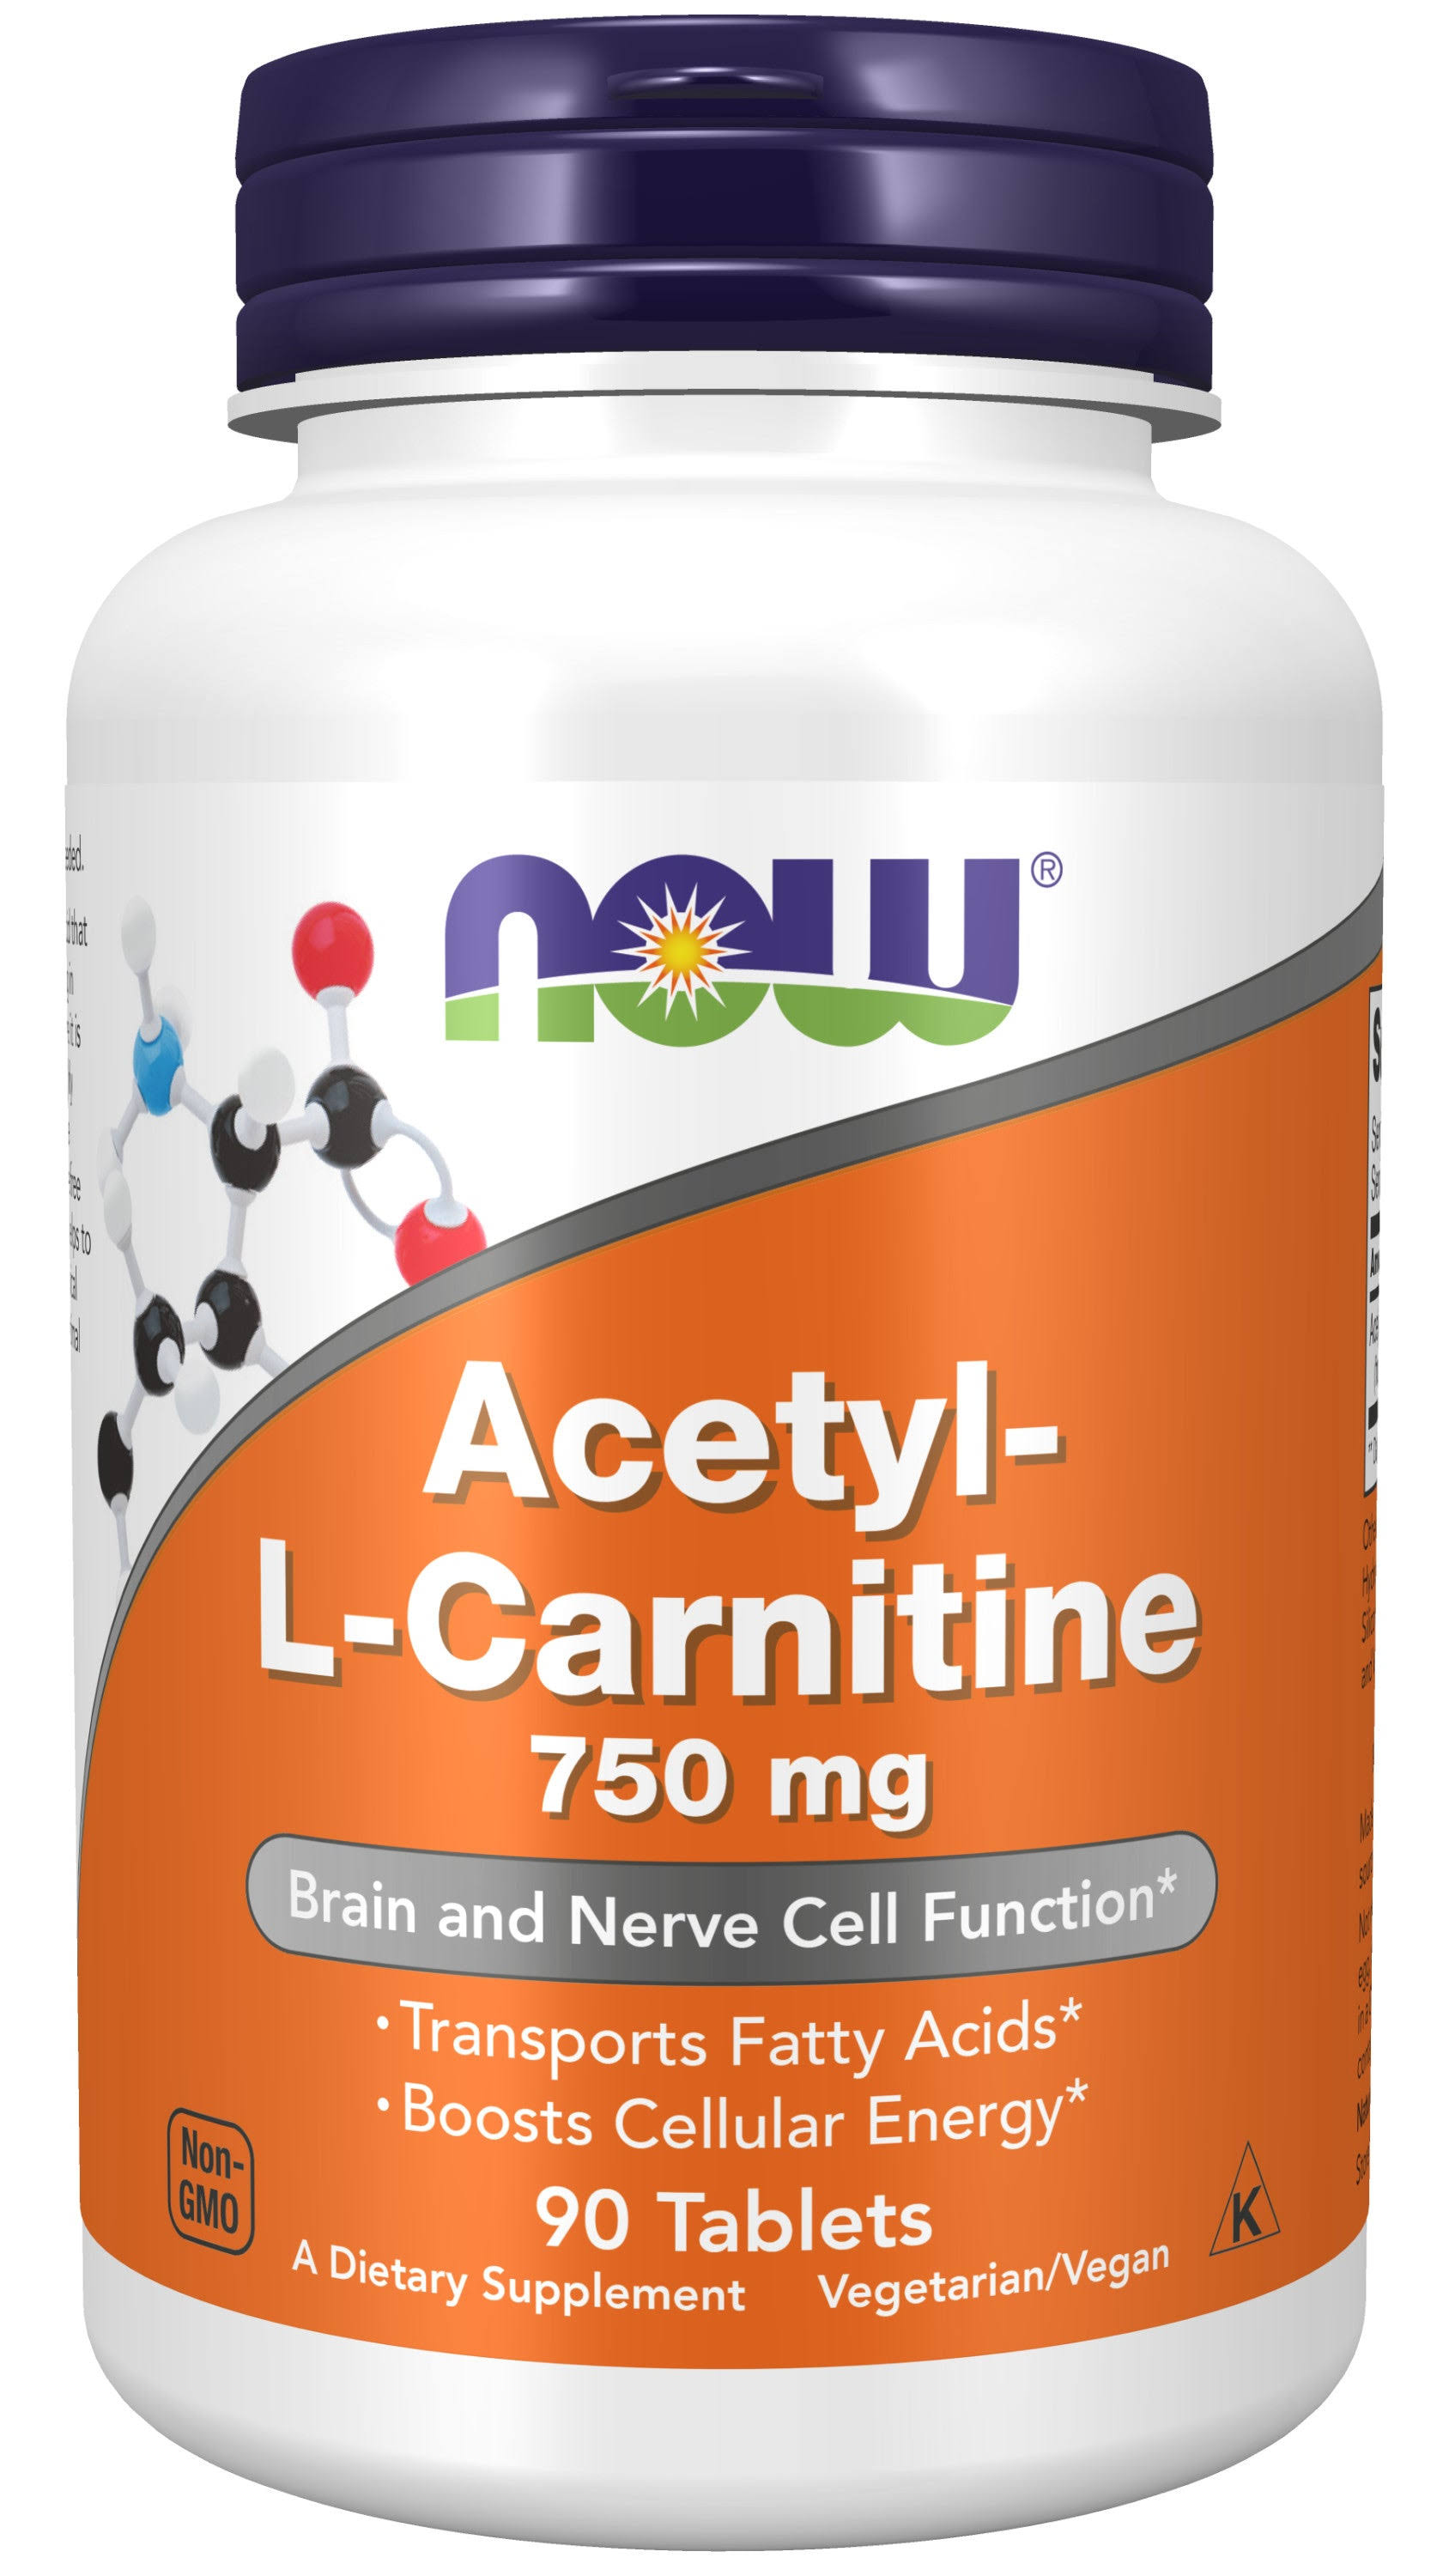 Now Foods Acetyl L-Carnitine Pure Powder